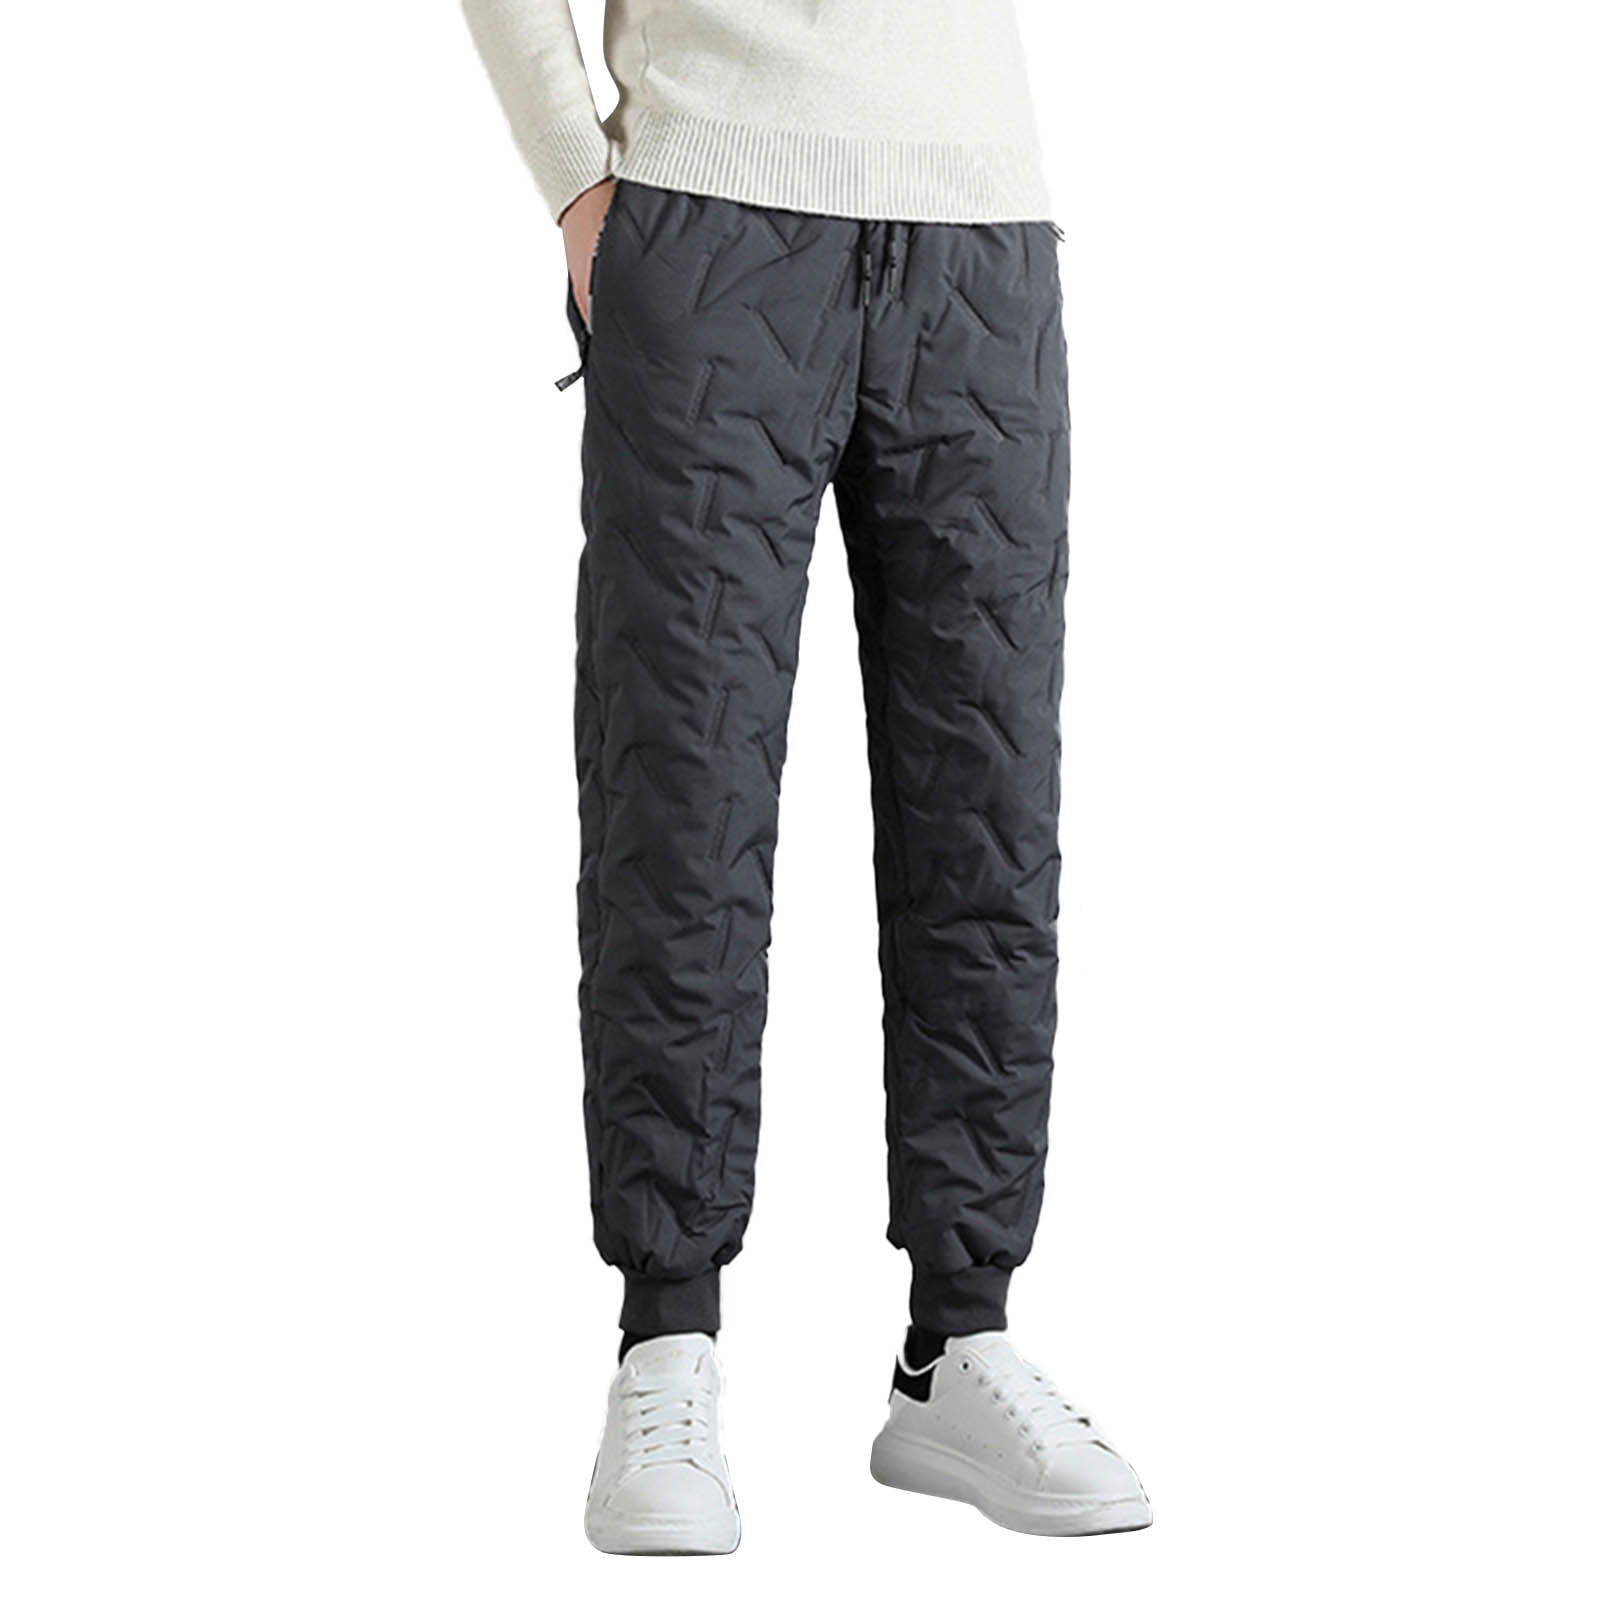 PMUYBHF Mens Sweatpants with Zipper Fly Male Casual Warm Trouser Plush ...